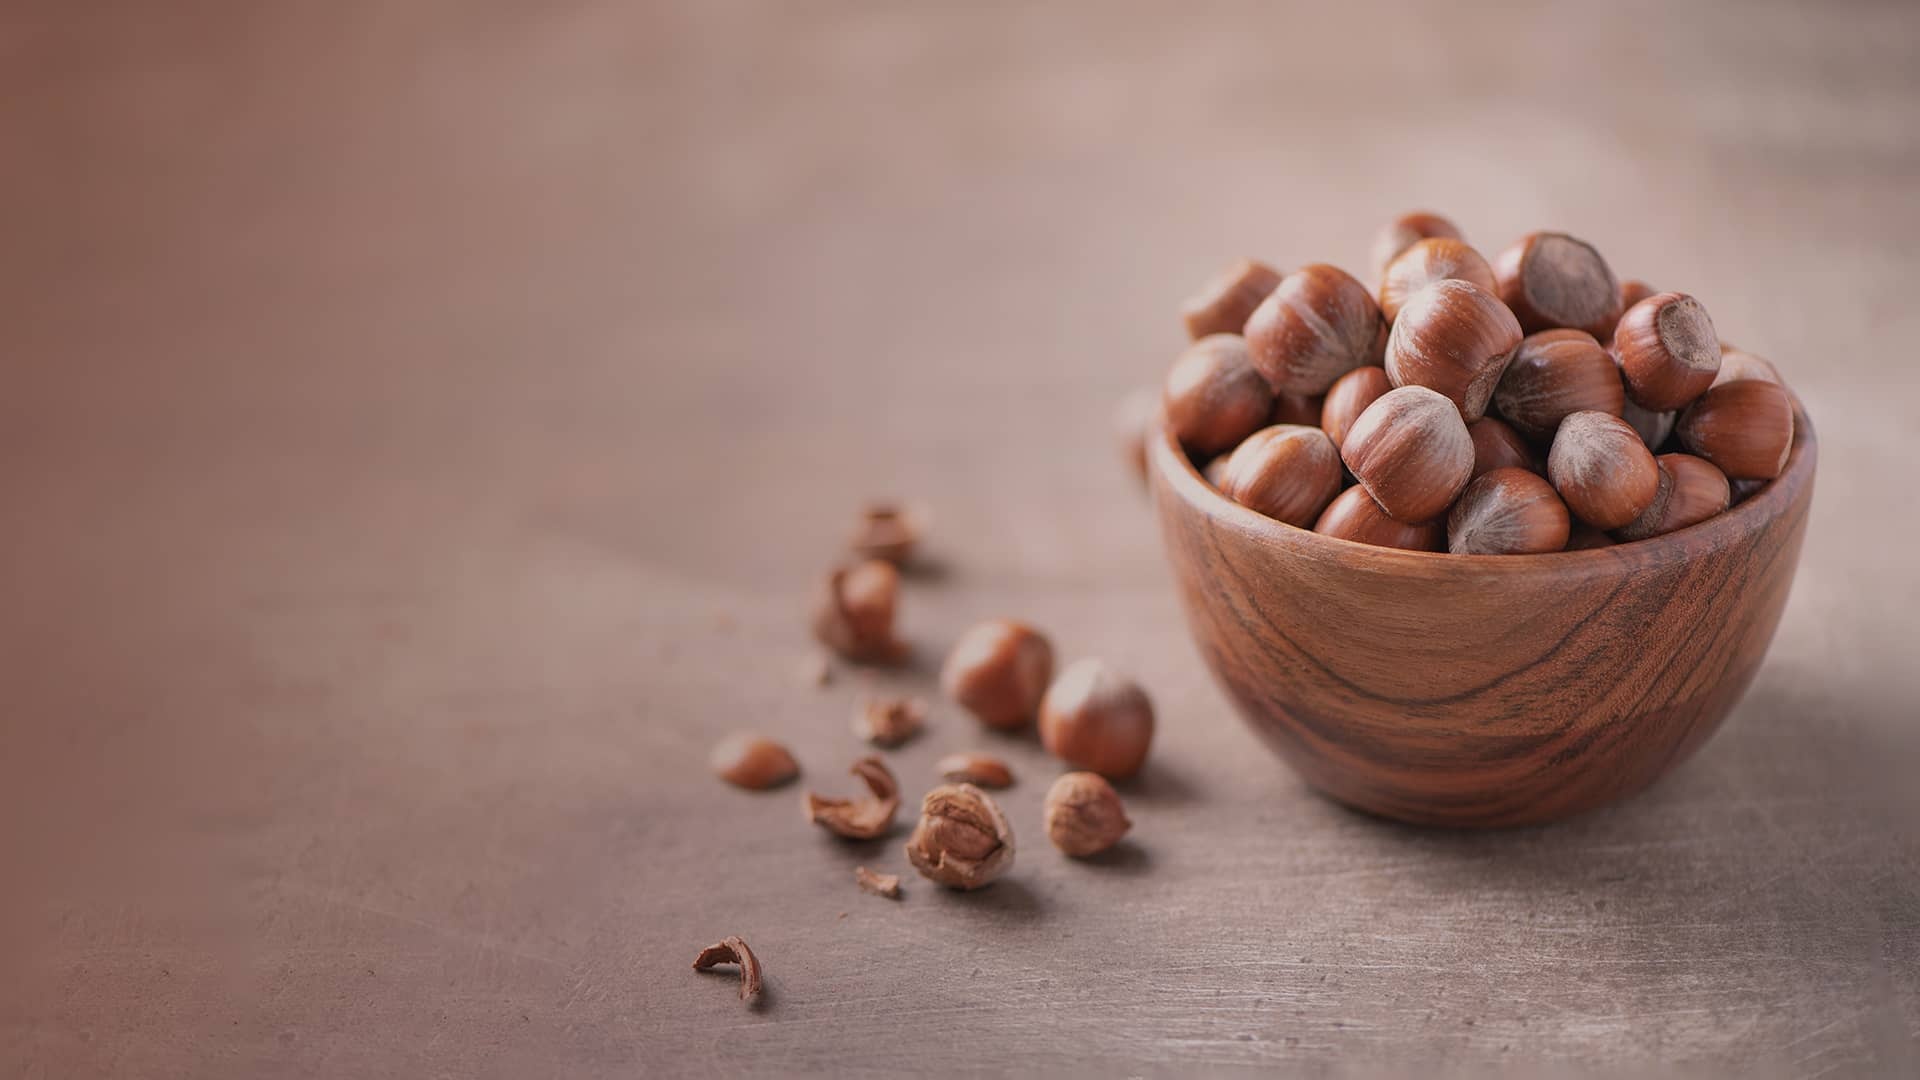 Hazelnuts: Used as flavoring agents of coffee and various alcoholic and non-alcoholic drinks. 1920x1080 Full HD Wallpaper.